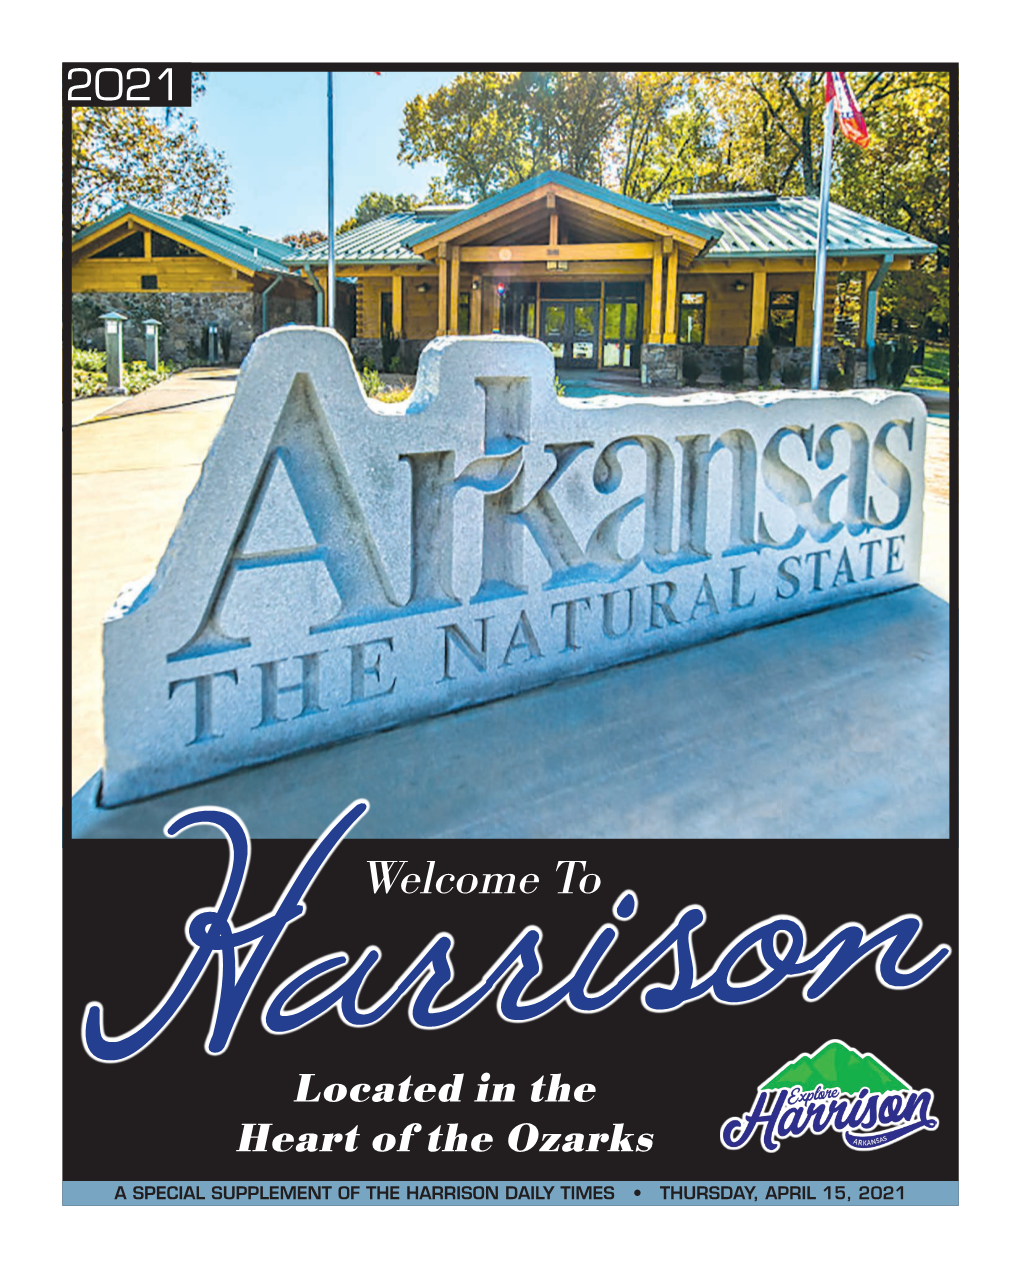 WELCOME to HARRISON, ARKANSAS Located in the Heart of the Ozark Mountains, Harrison Is Is Fun for Families and People of All Ages